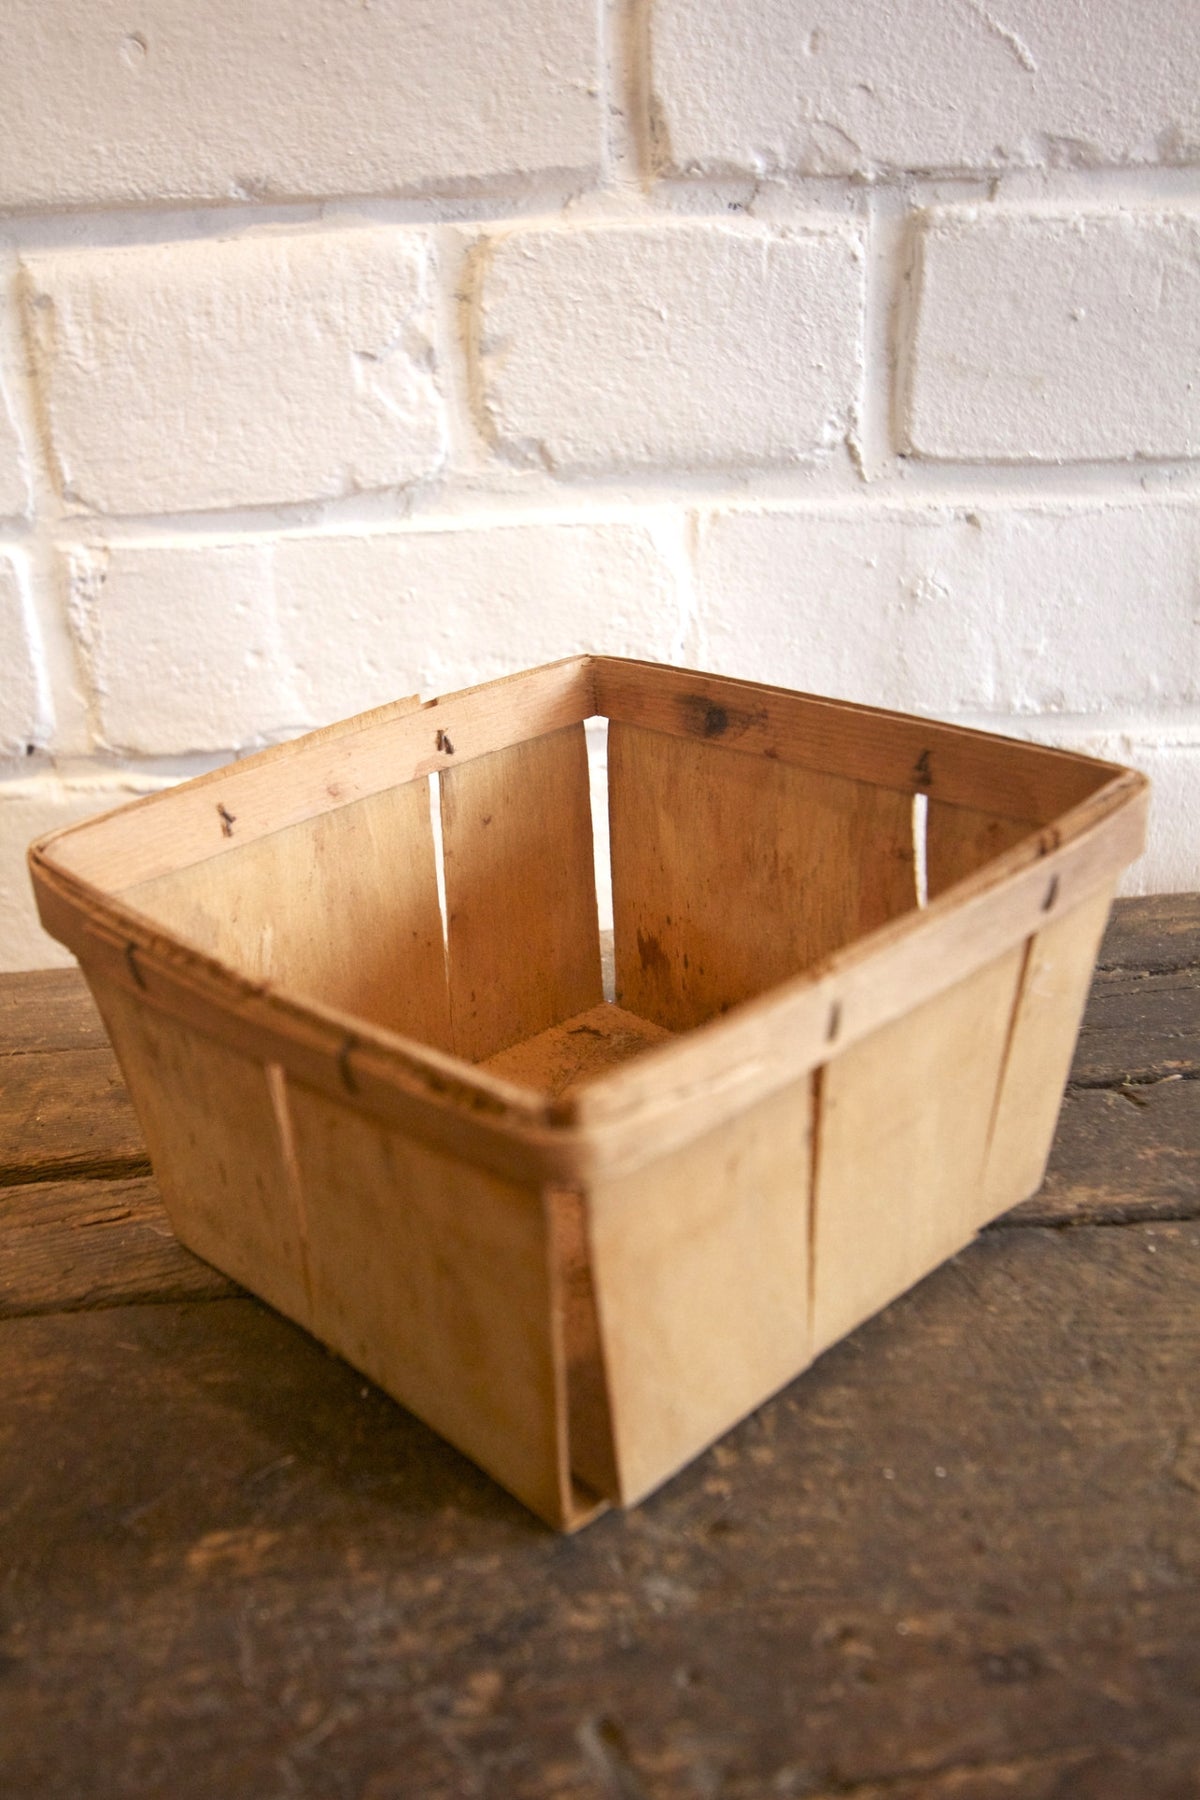 Four Wood Berry Baskets